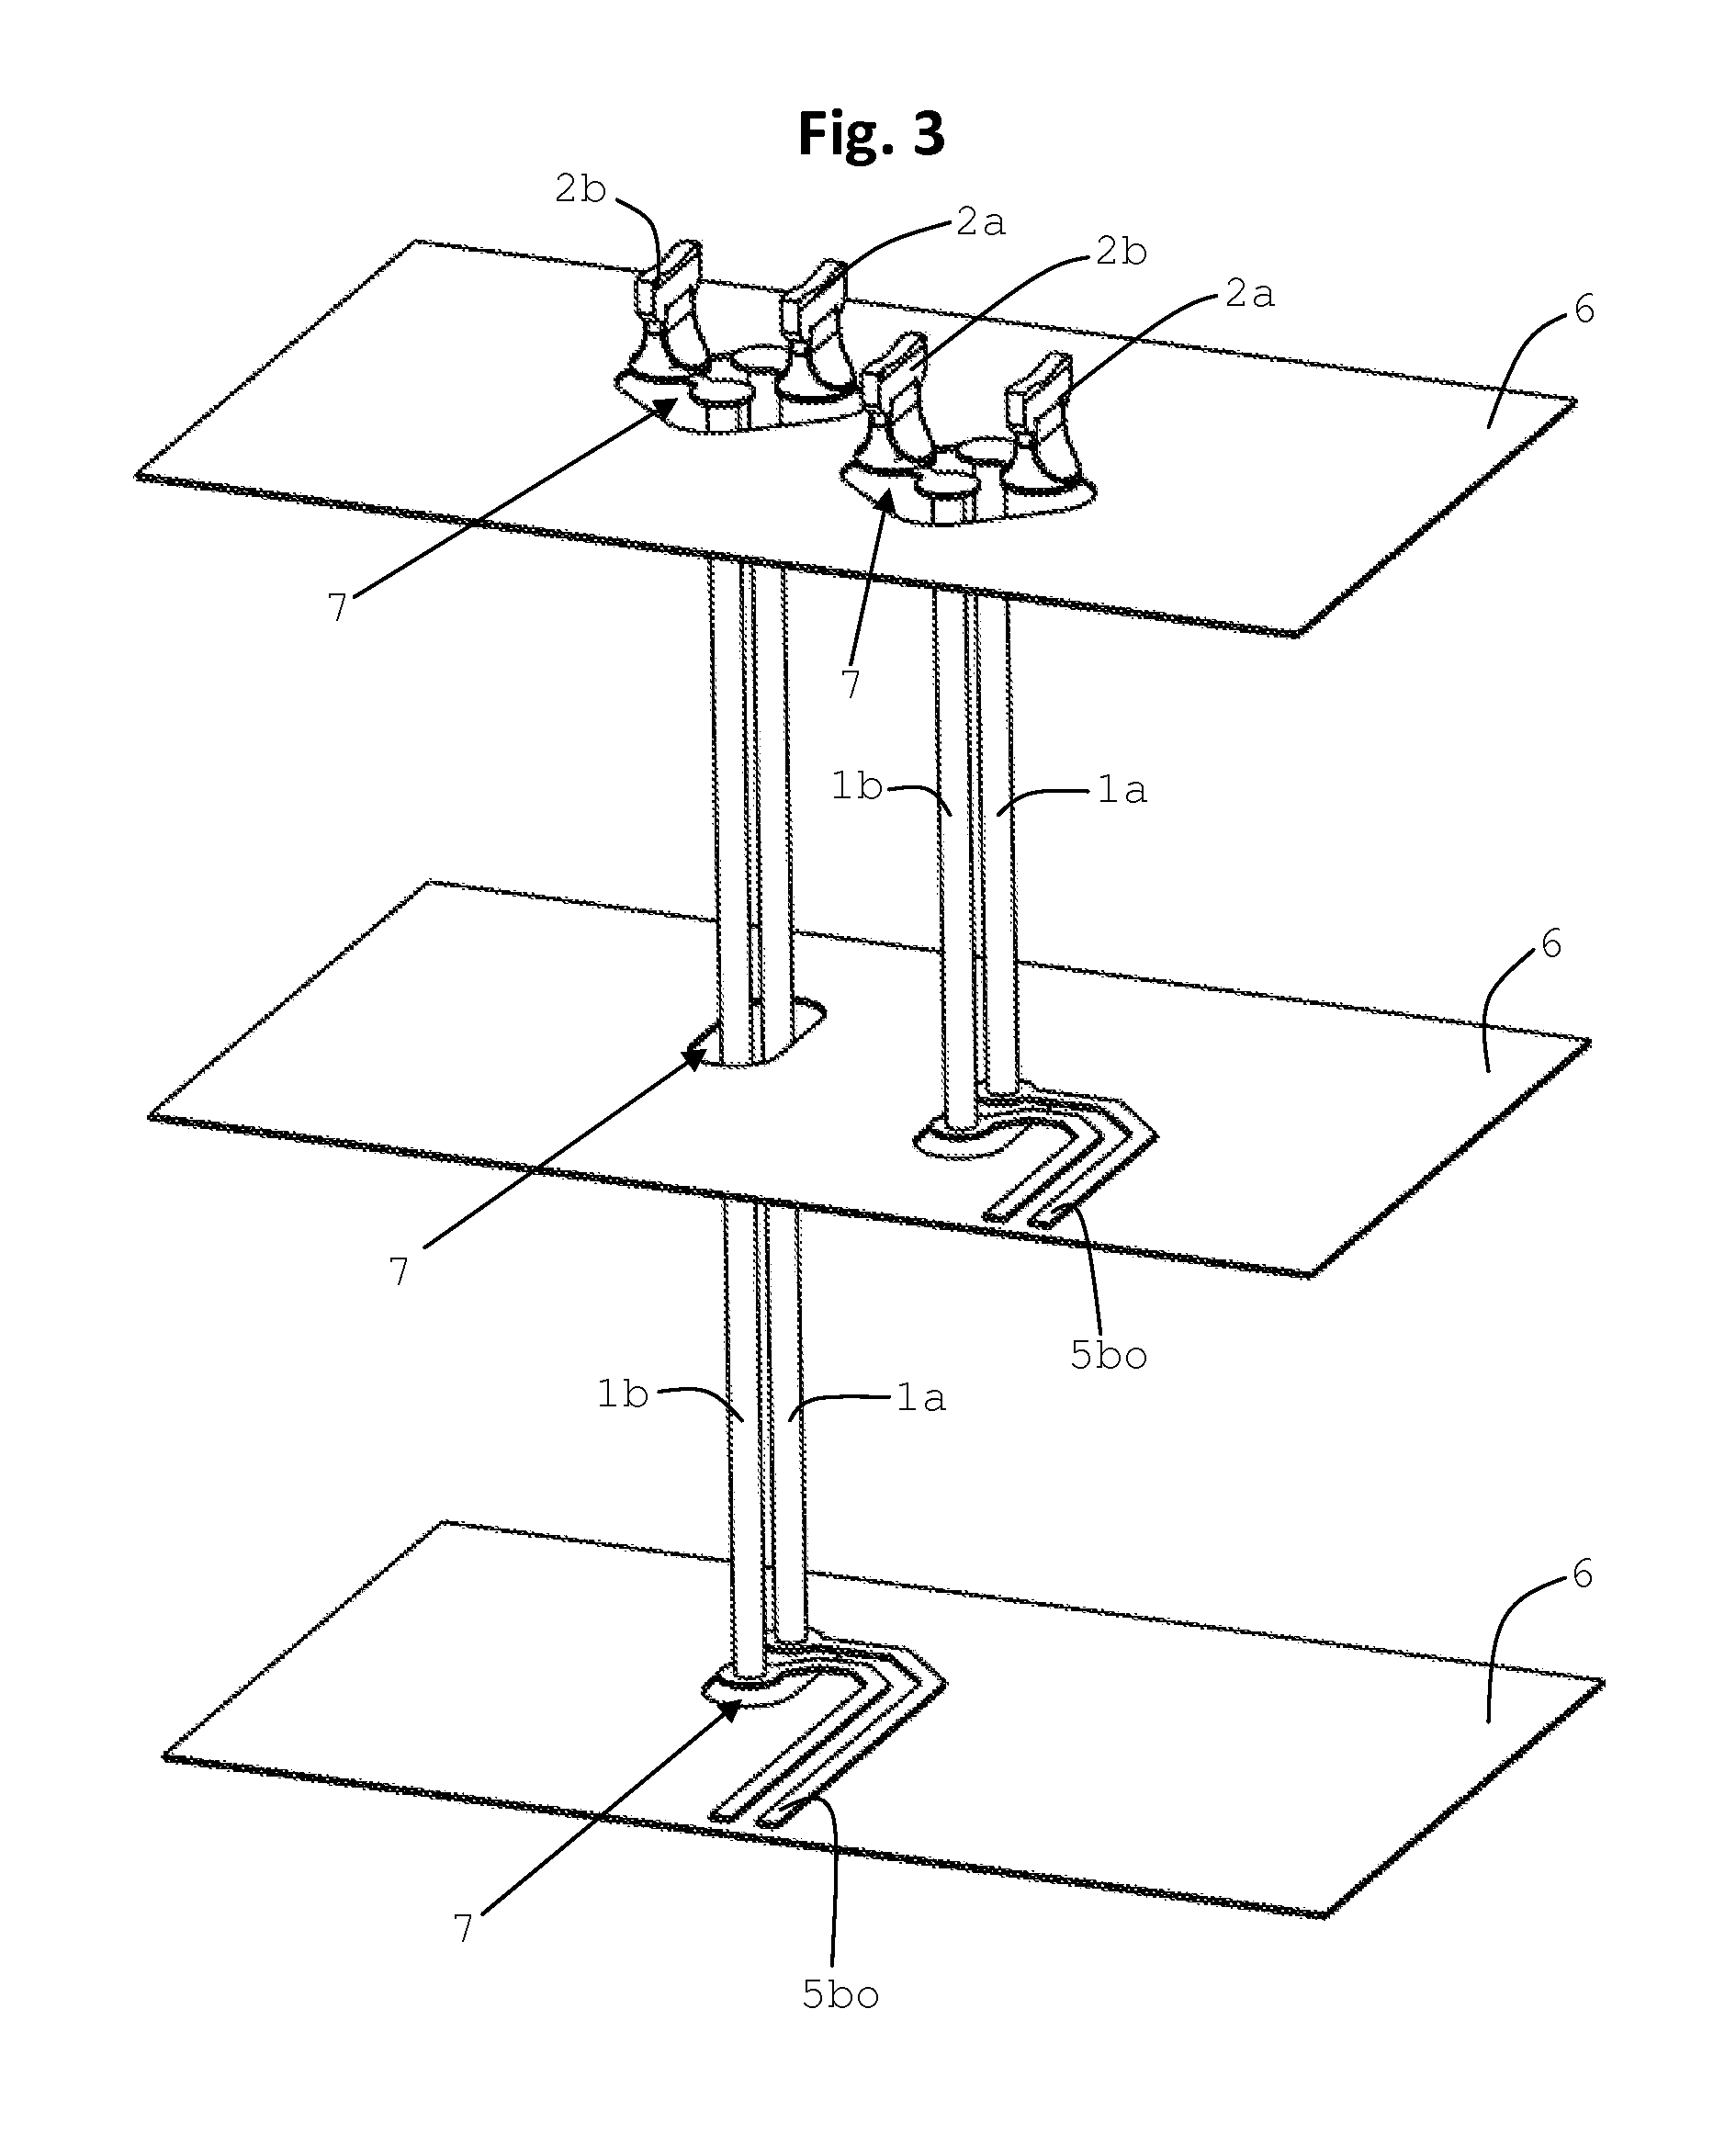 Via structure for transmitting differential signals